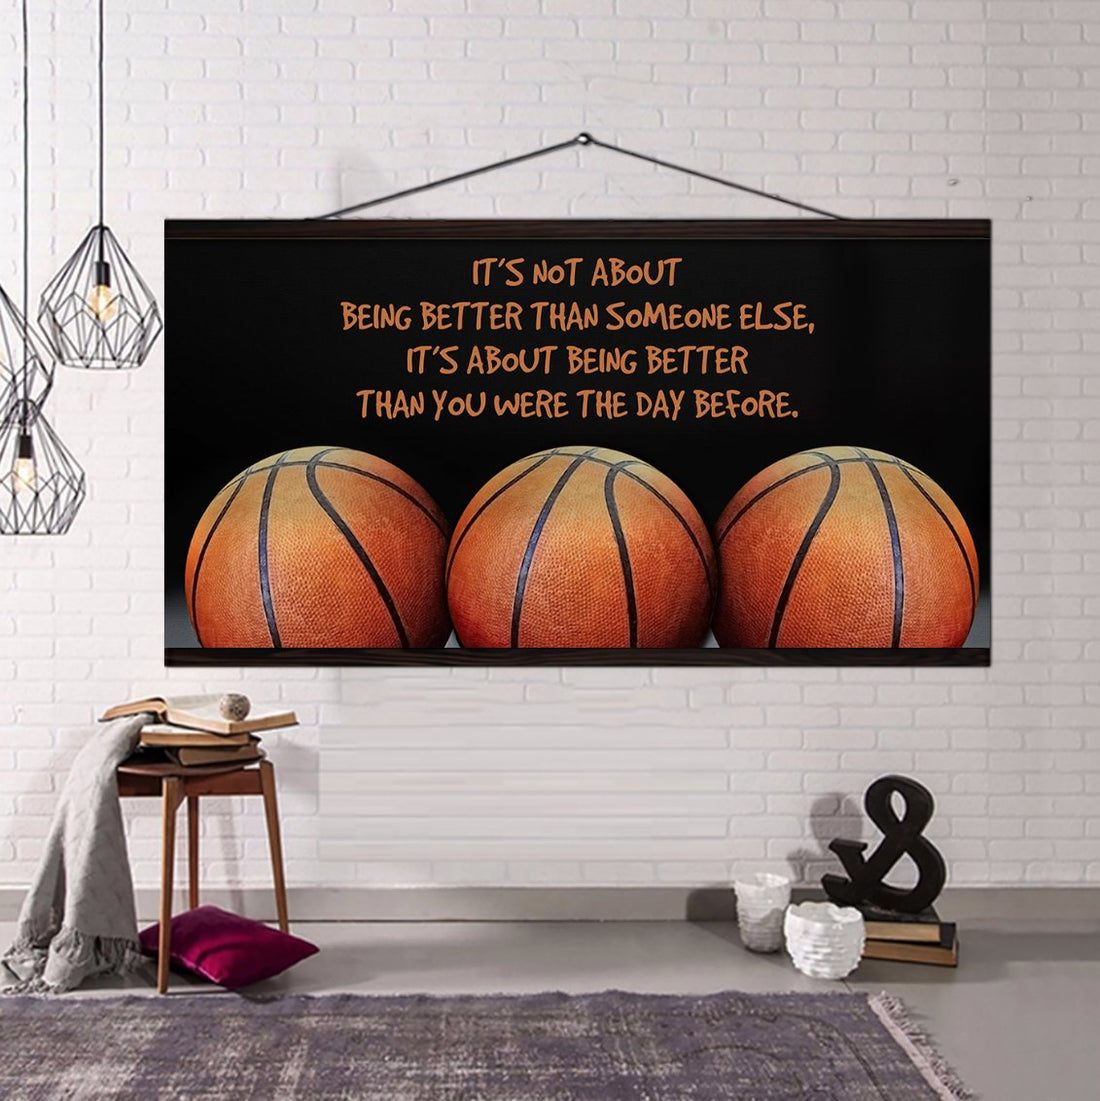 Basketball 3 It is not About Being Better Than Someone Else It is about being better than you were the day before